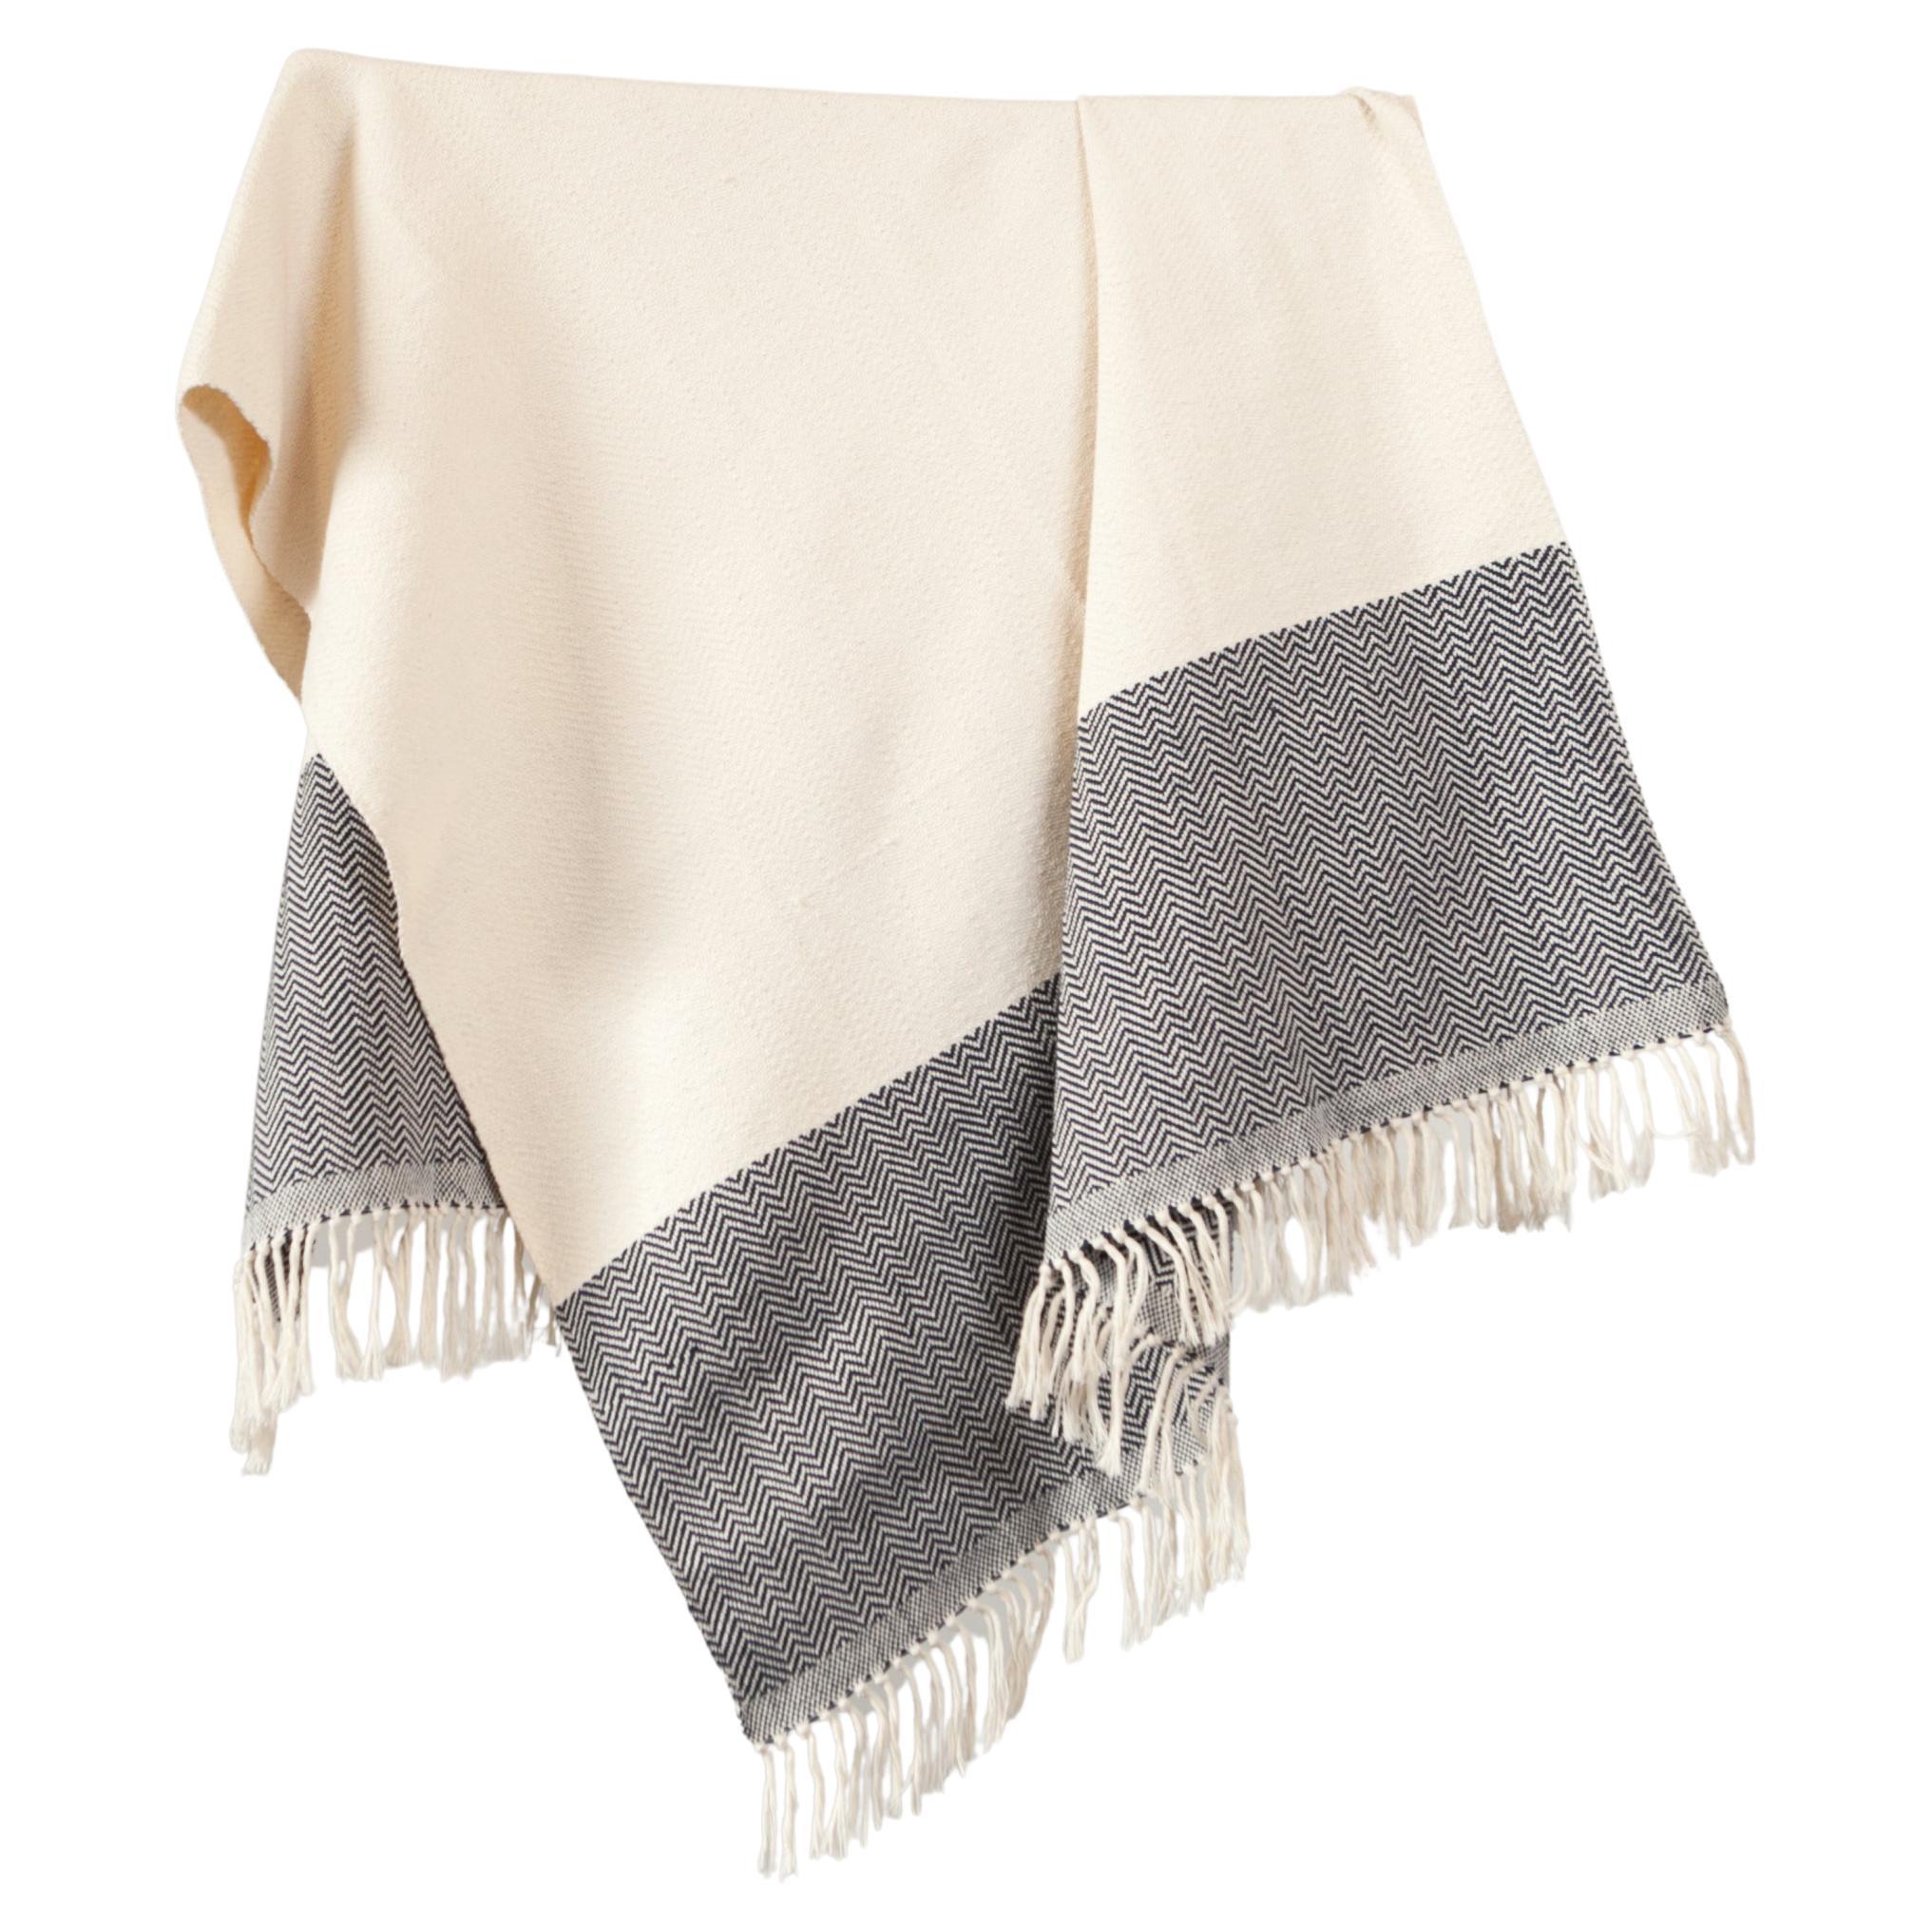 Handwoven Cotton Throw in Natural and Gray with Herringbone Hem, in Stock For Sale